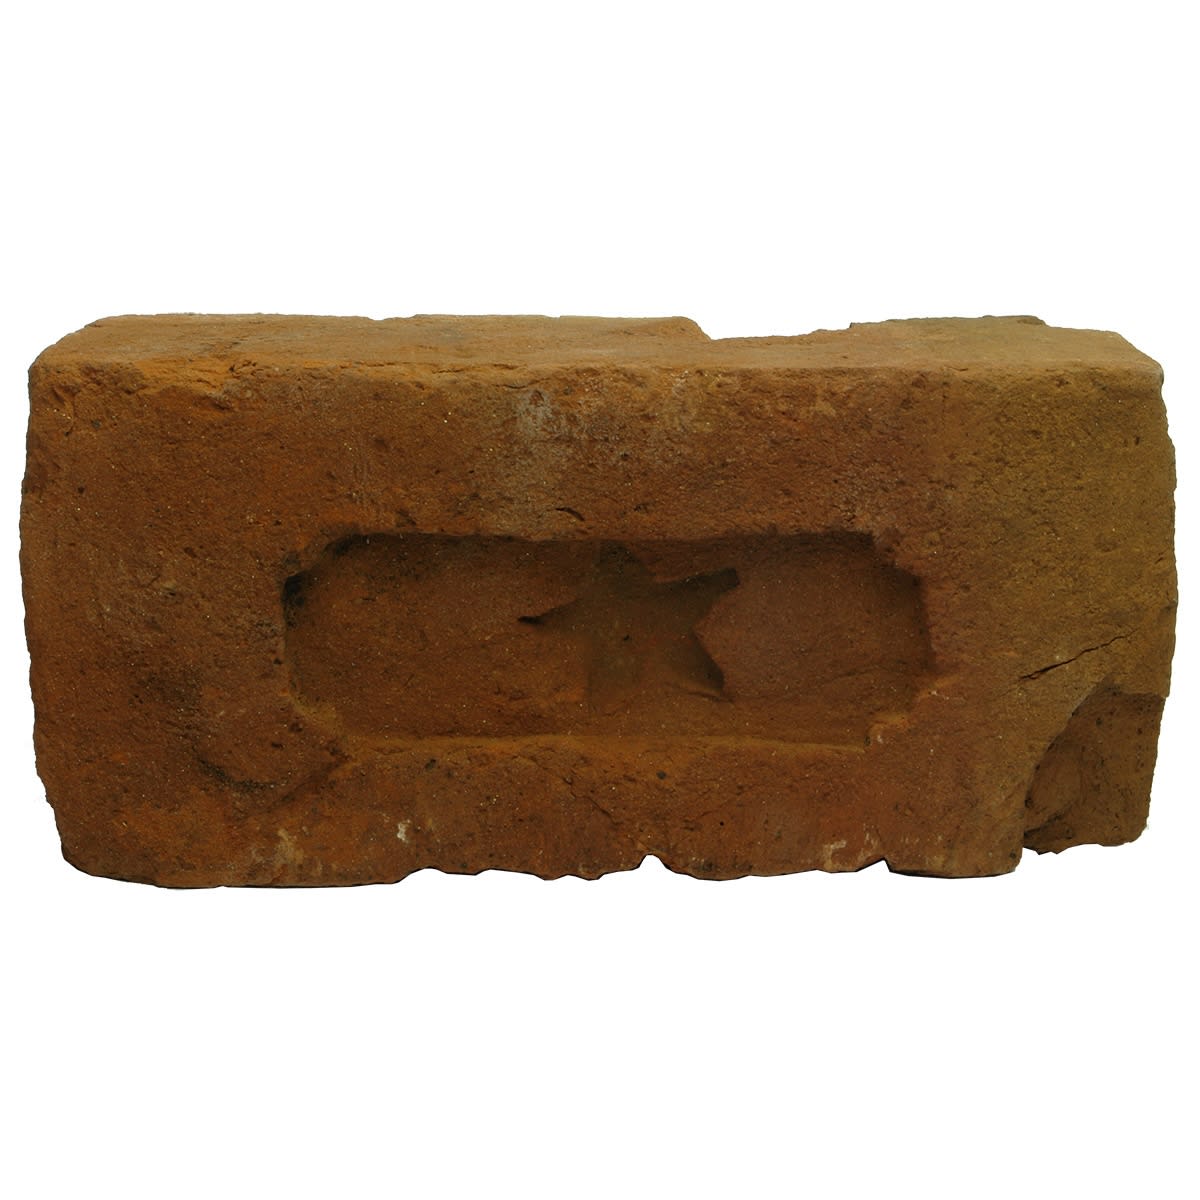 Brick. Five pointed star in a deep rectangle. Sandstock type.